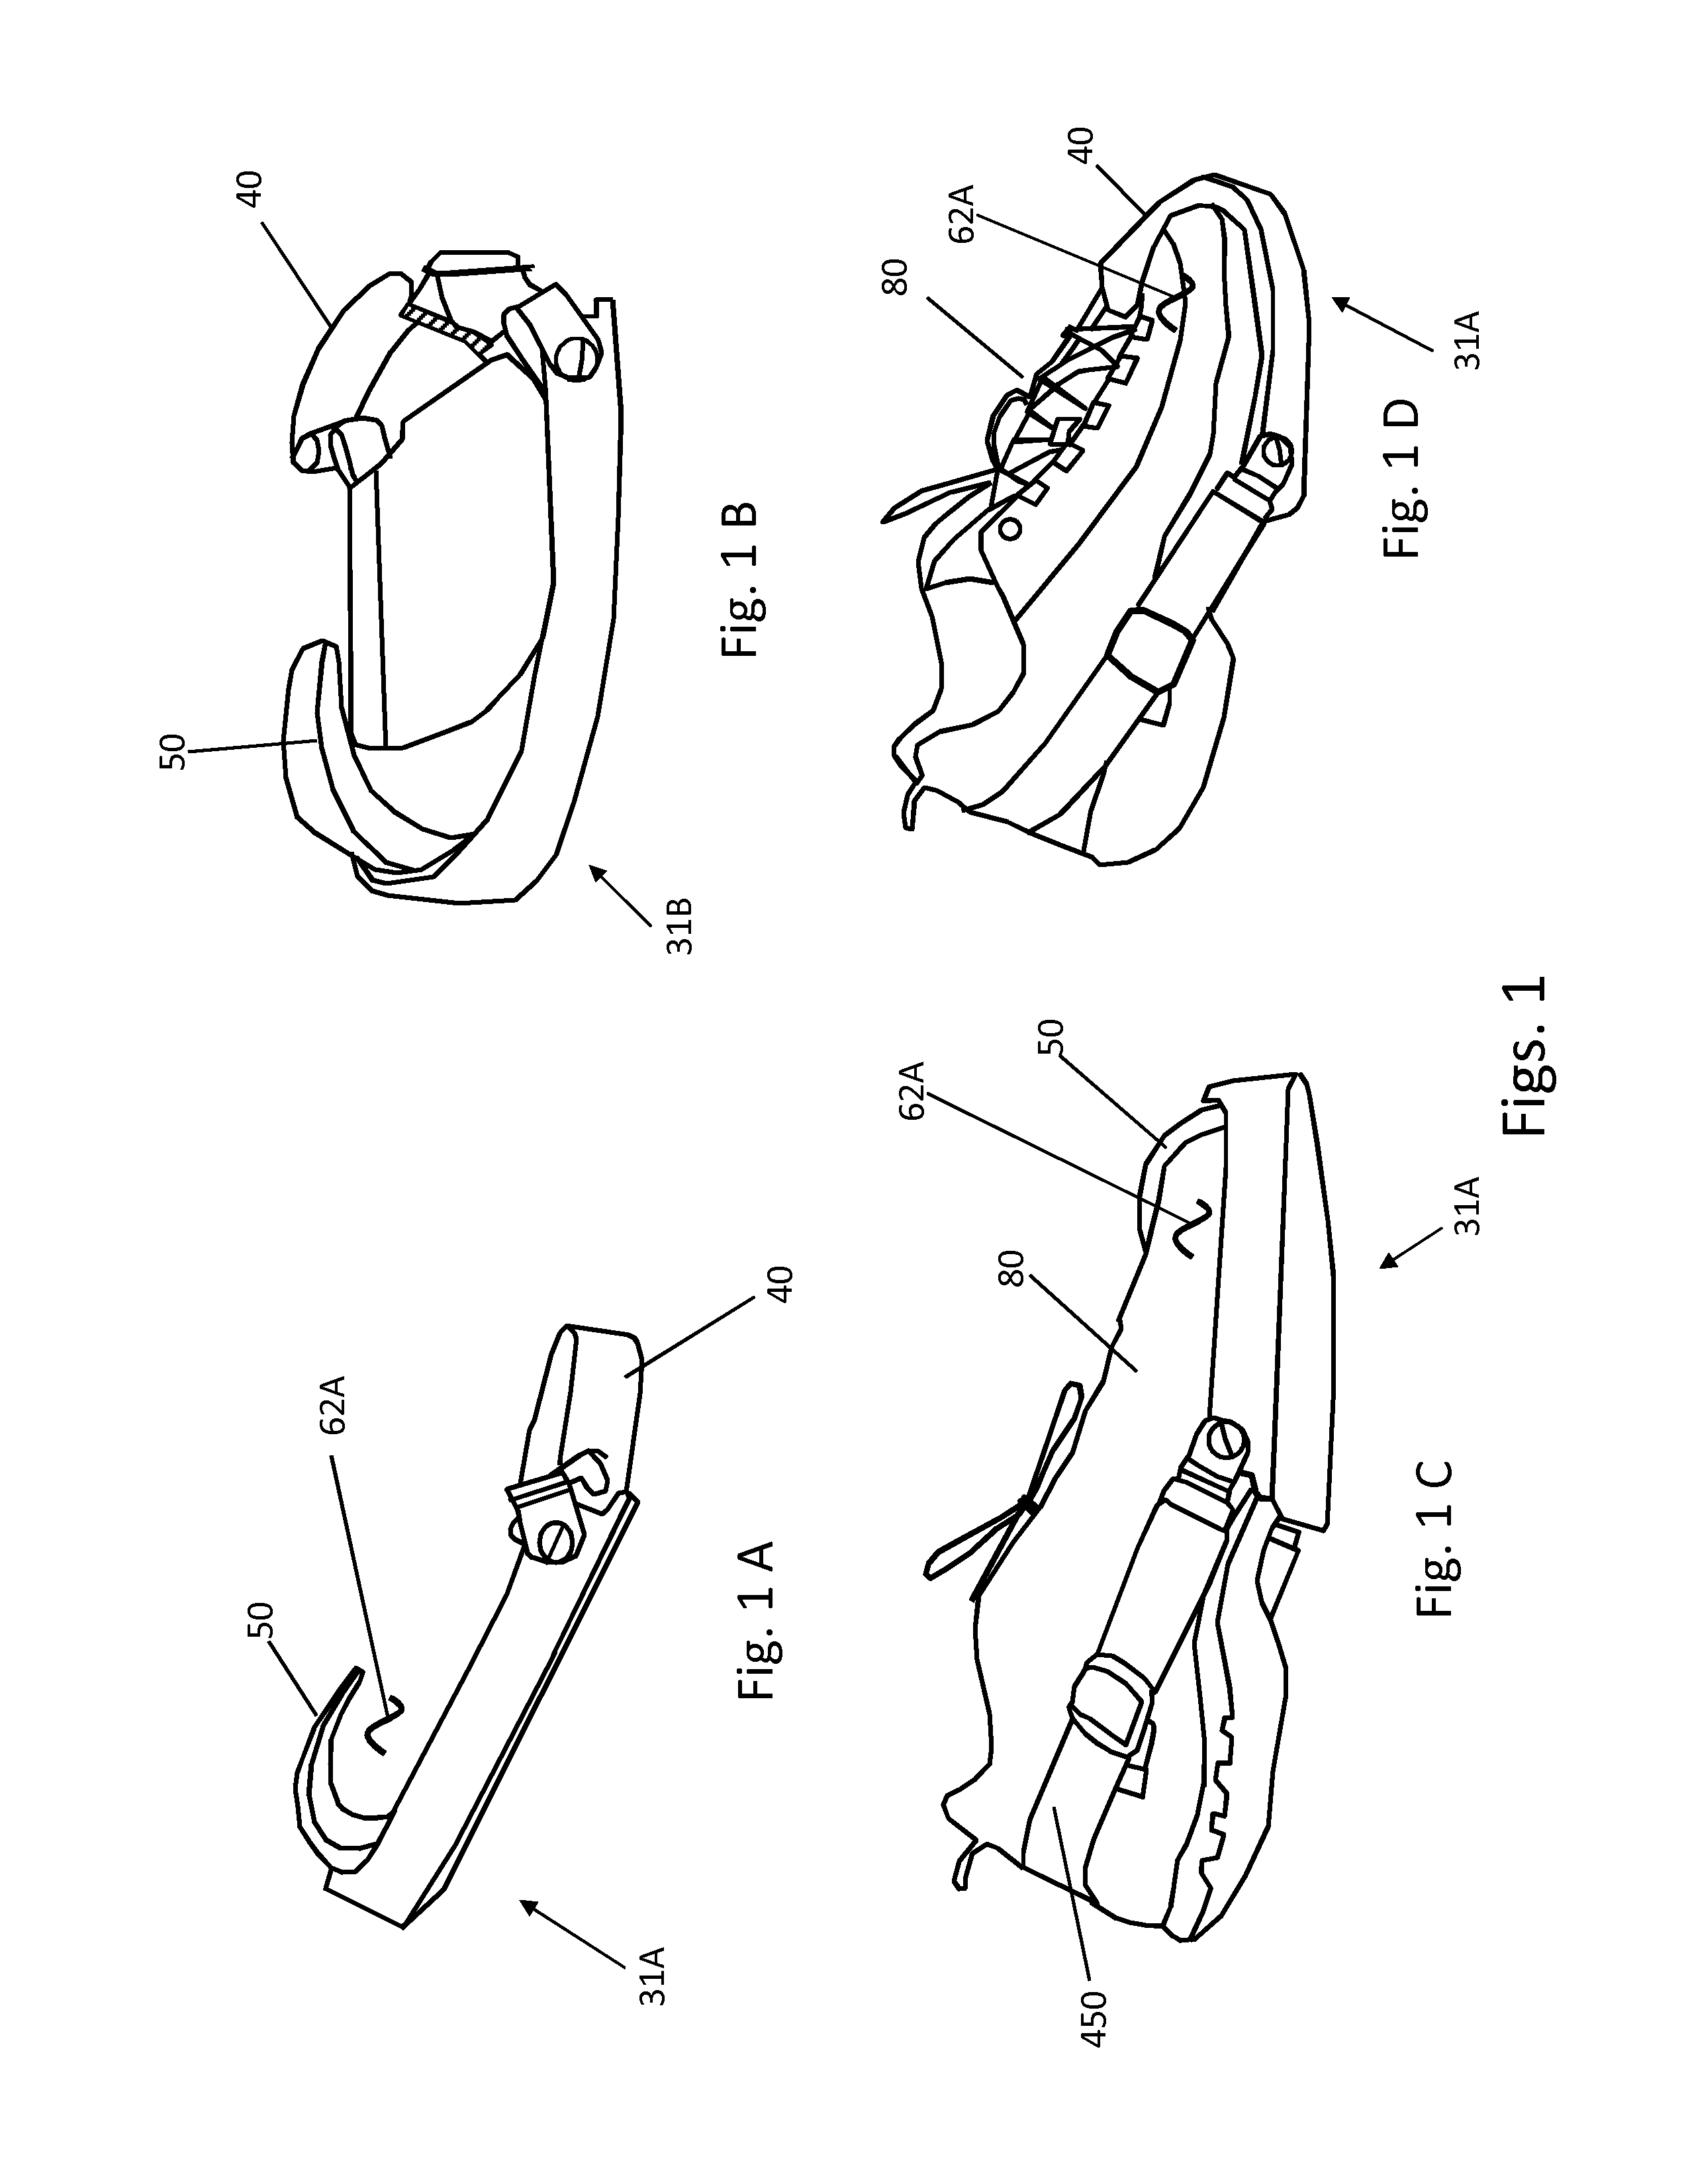 Special step through ambulation aid device